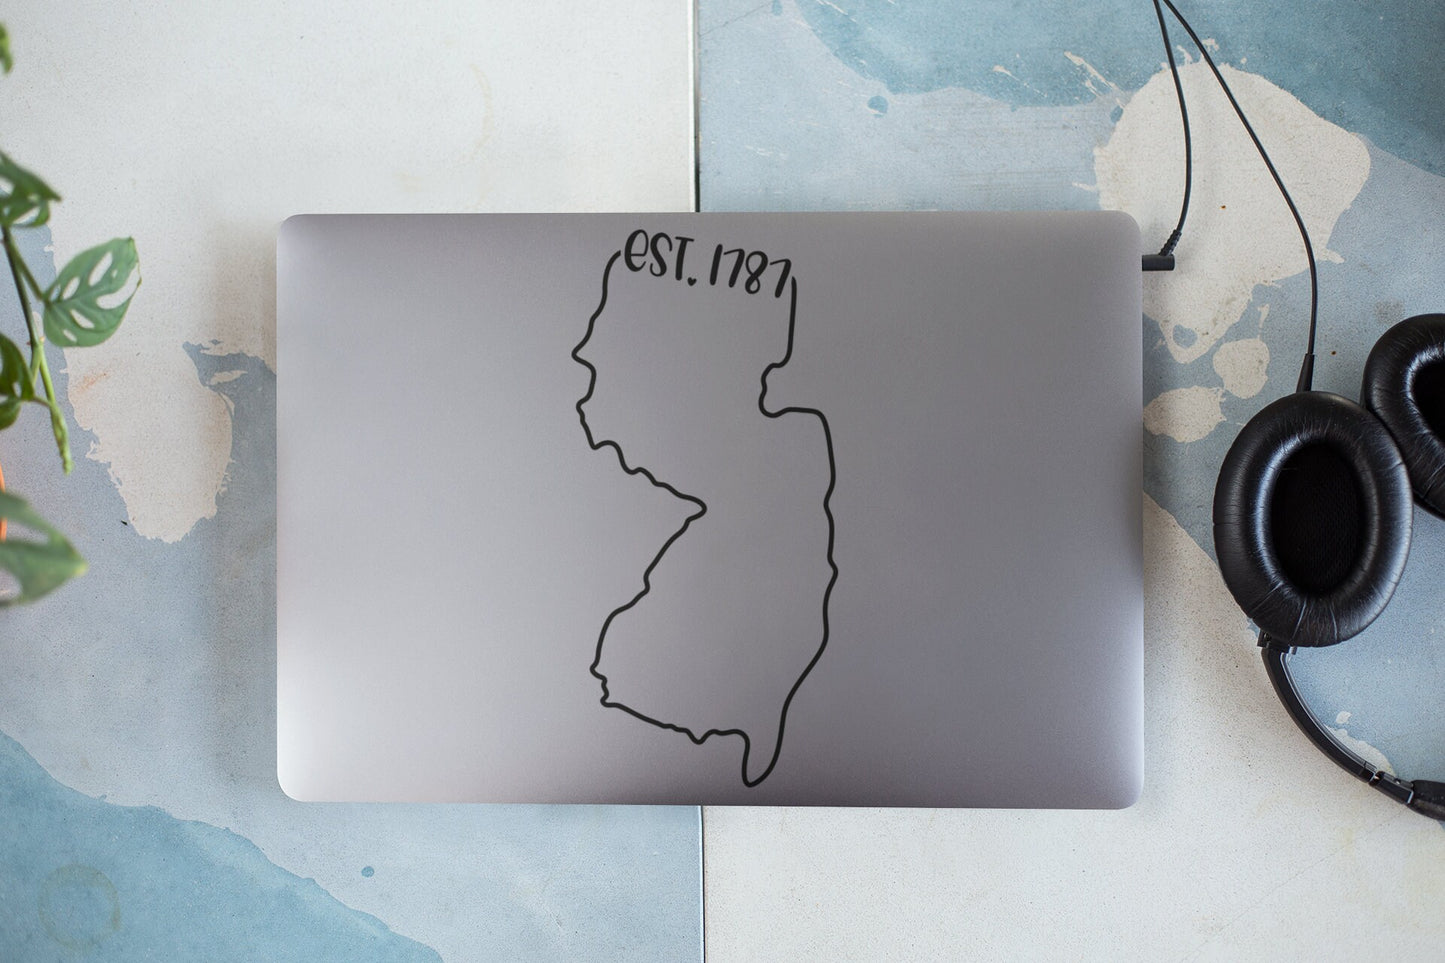 New Jersey EST. 1787 Decal - Many Colors & Sizes